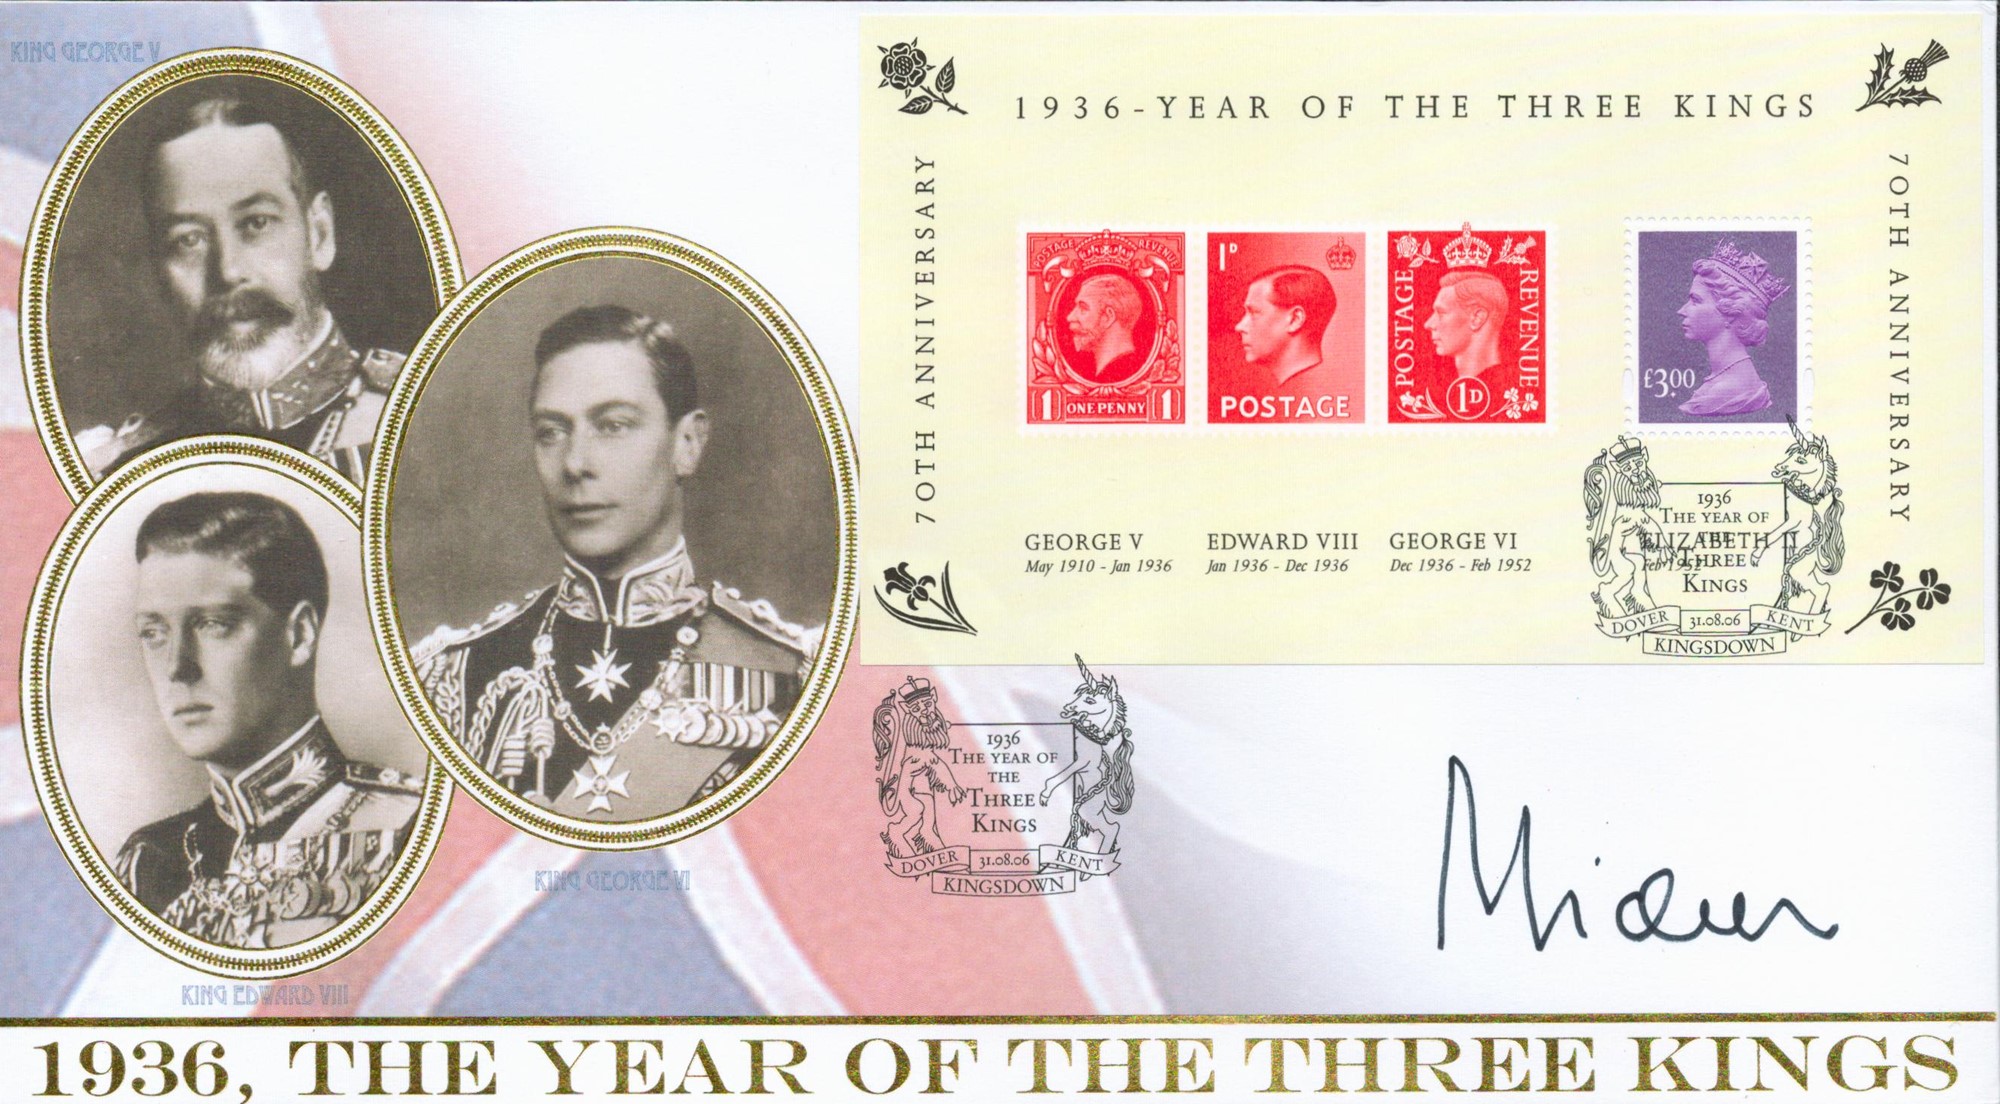 HRH Prince Michael of Kent Signed Internet Stamps, 1936 The Year of the Three Kings First Day Cover.